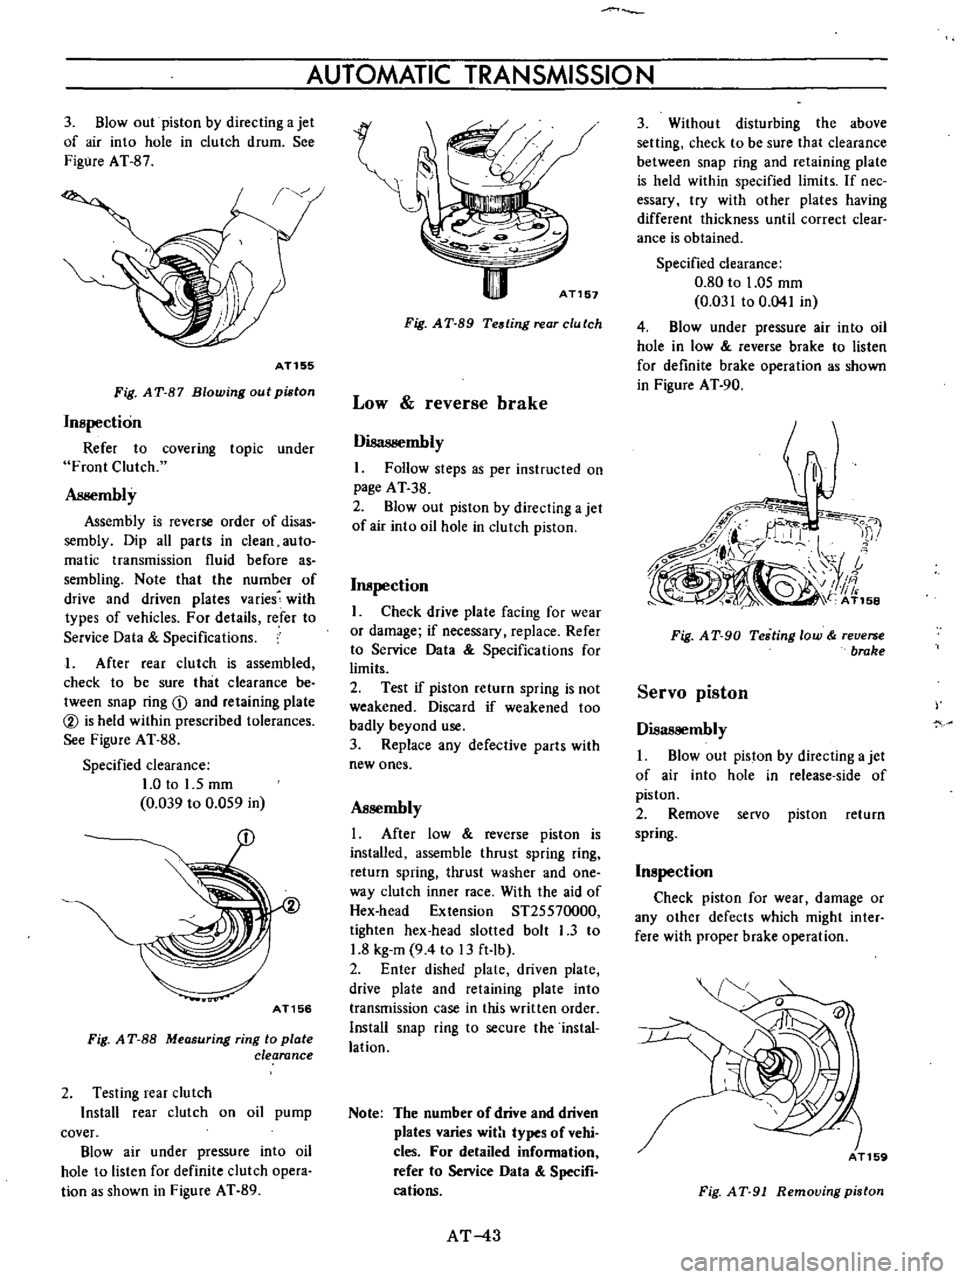 DATSUN B110 1973  Service Repair Manual 
3

Blowout

piston 
by 
directing 
a

jet

of 
air 
into

hole 
in

clutch 
drum 
See

Figure 
AT 
S 
7

AT155

Fig 
AT 
87

Blowing 
out

piston

Inspection

Refer 
to

covering 
topic 
under

Front